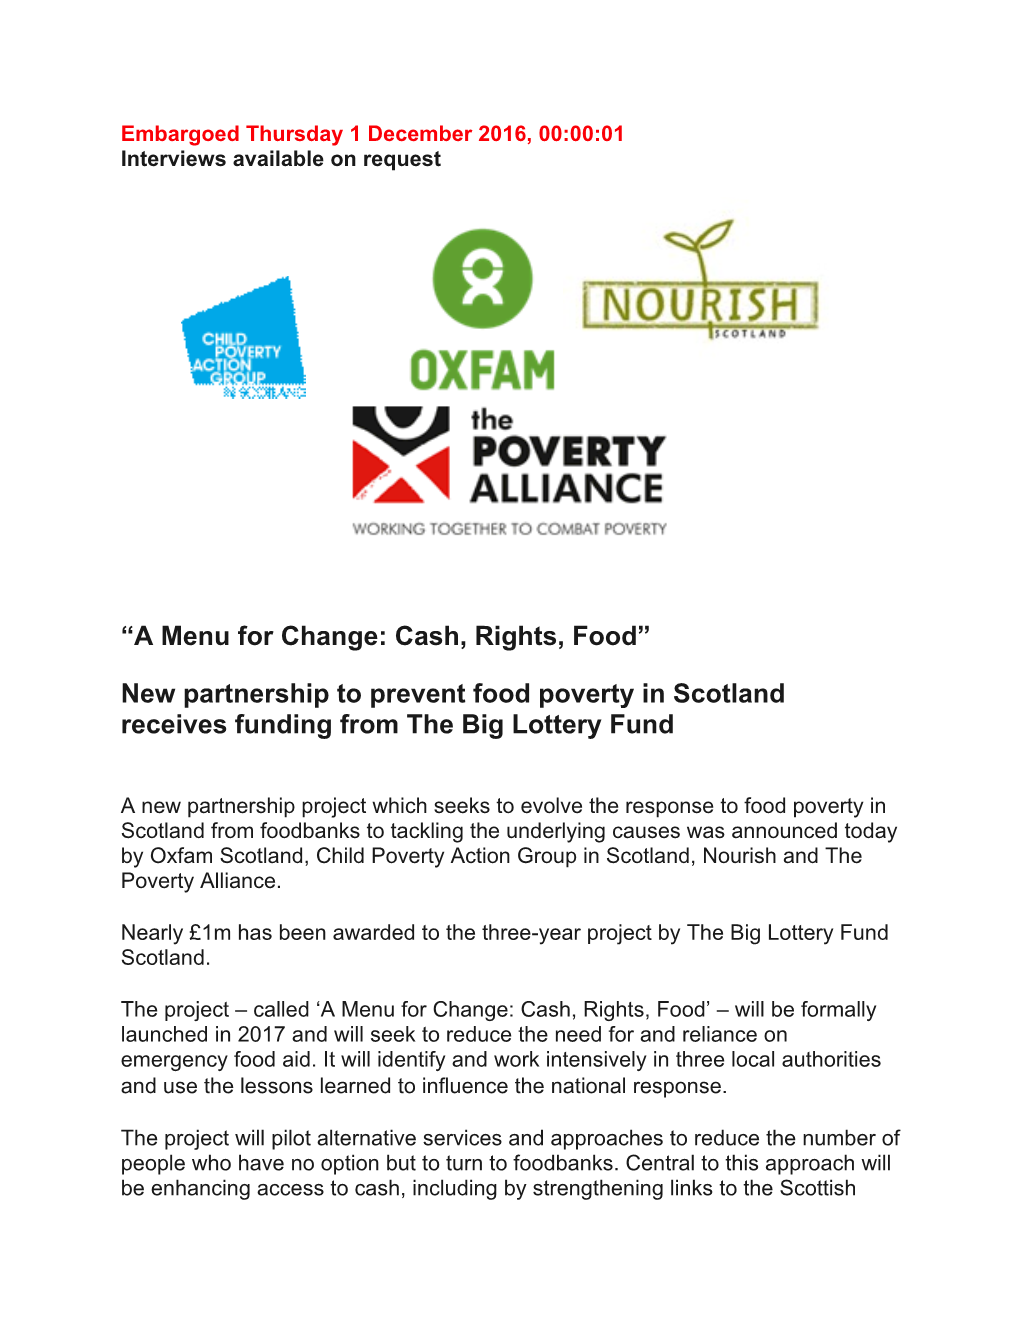 A Menu for Change: Cash, Rights, Food